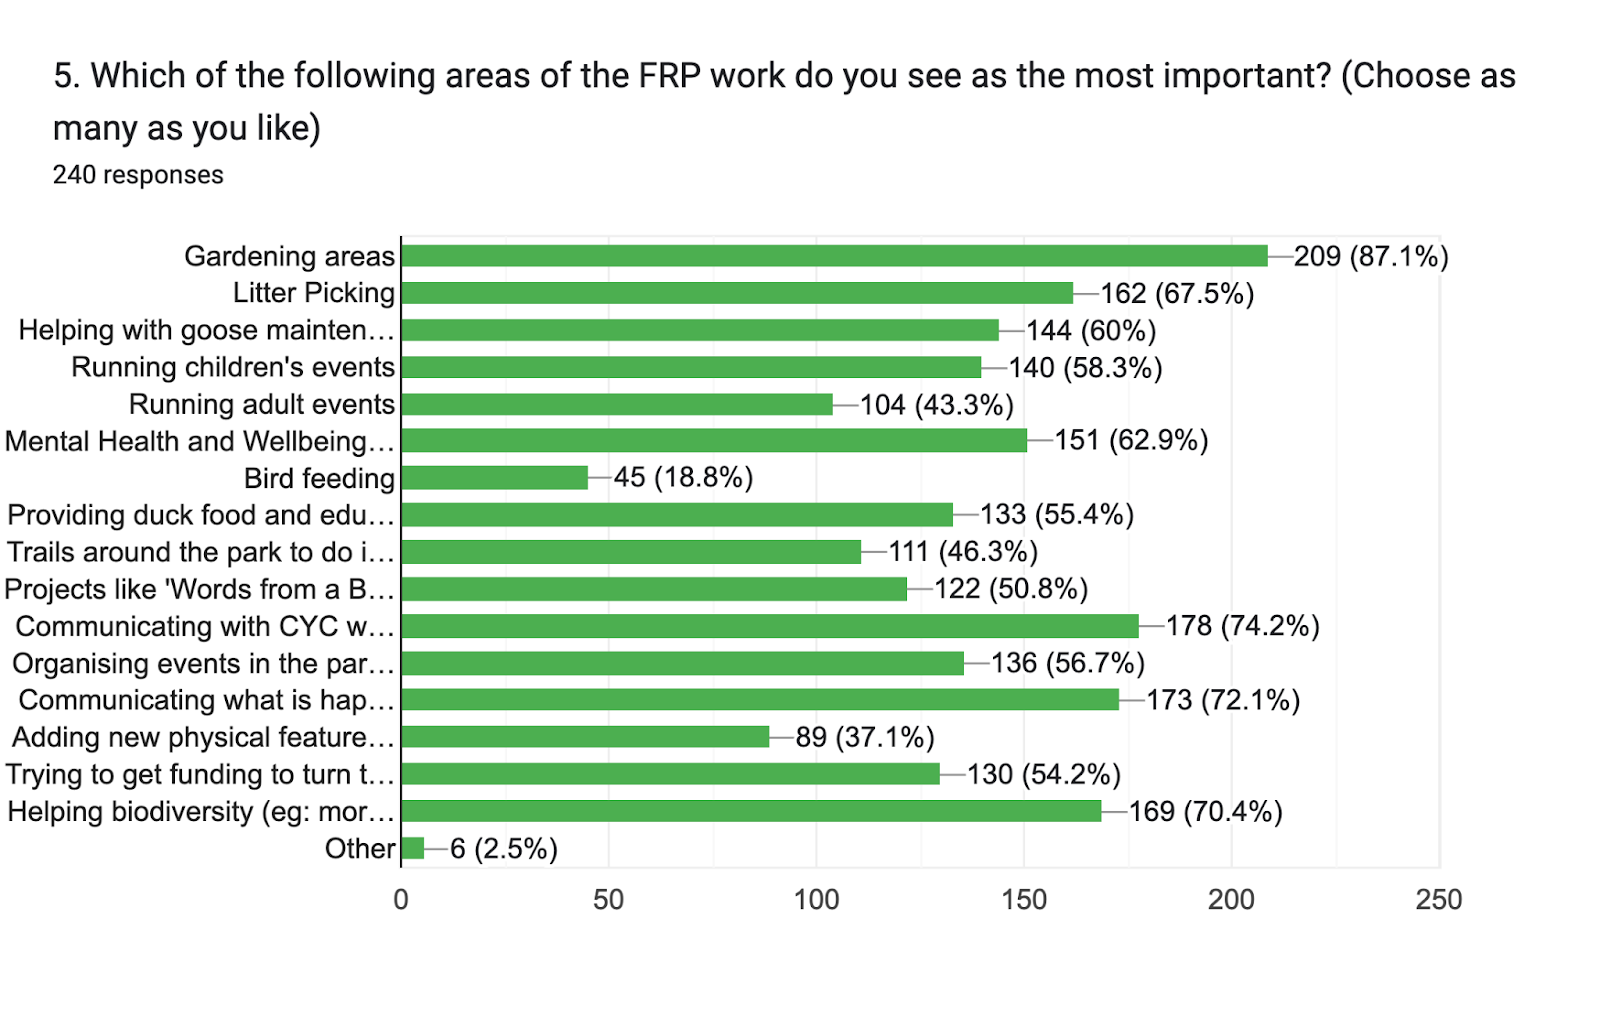 Forms response chart. Question title: 5. Which of the following areas of the FRP work do you see as the most important? (Choose as many as you like). Number of responses: 240 responses.